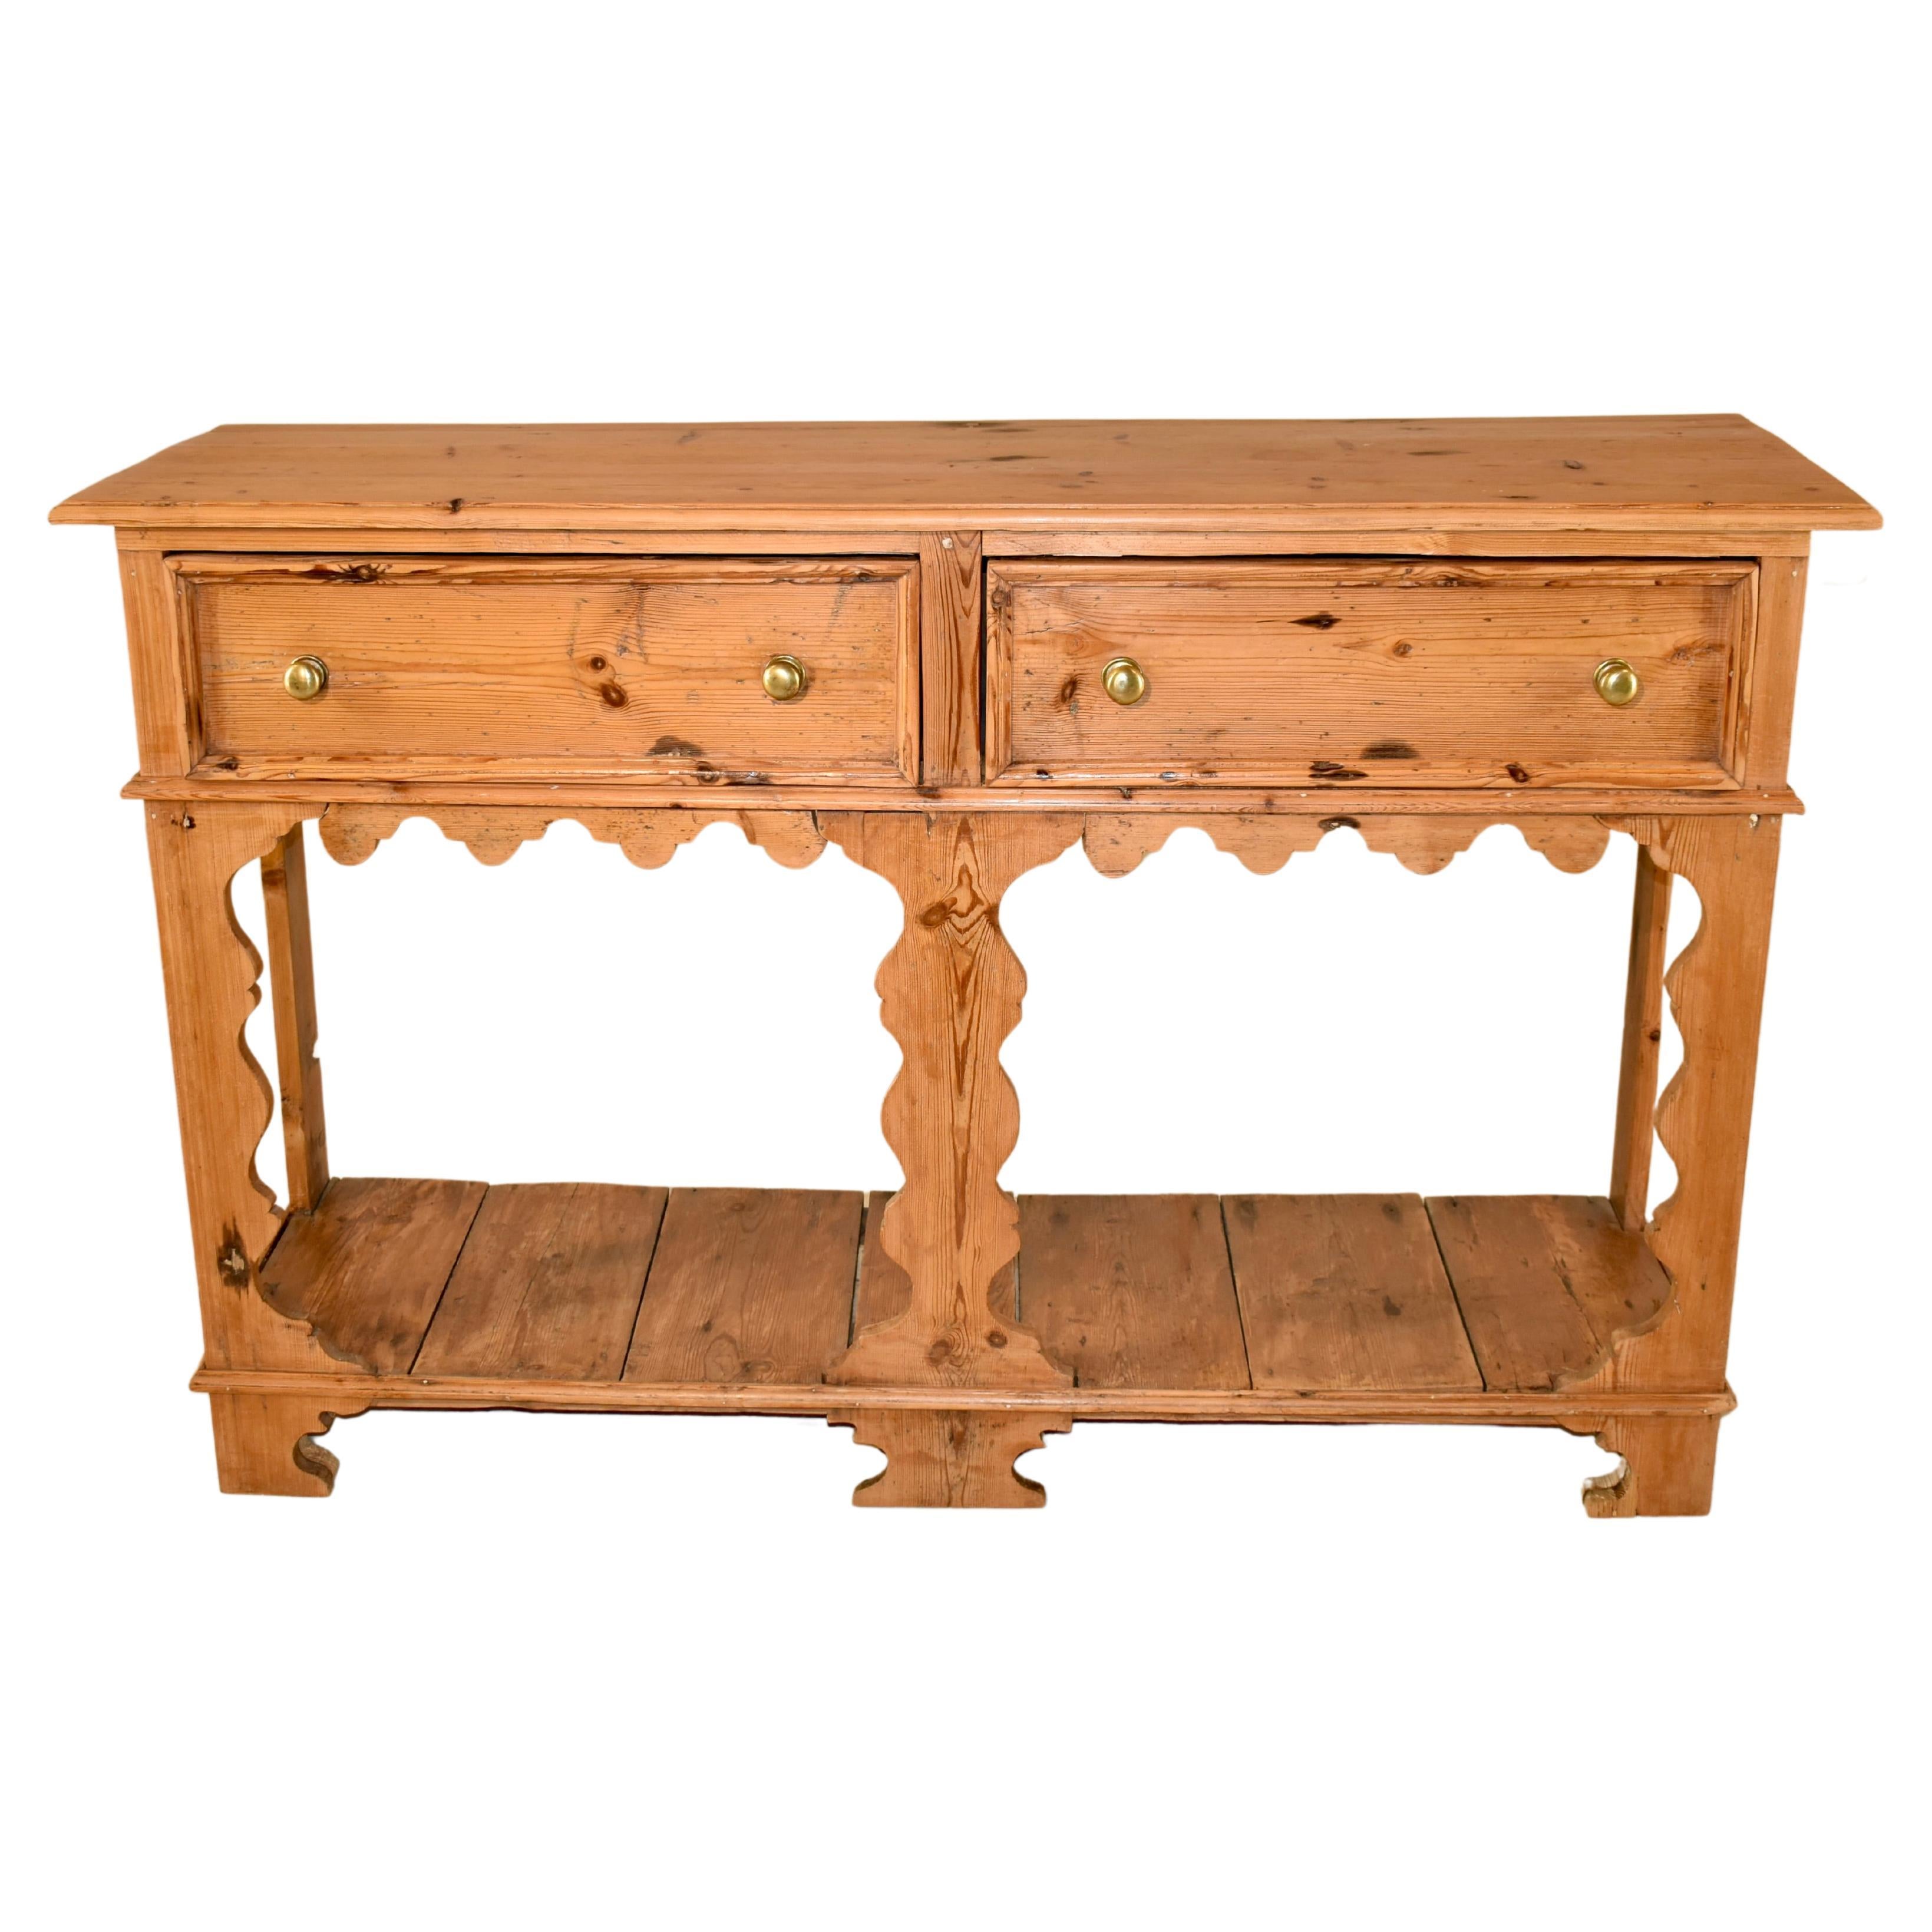 19th Century English Pine Sideboard For Sale